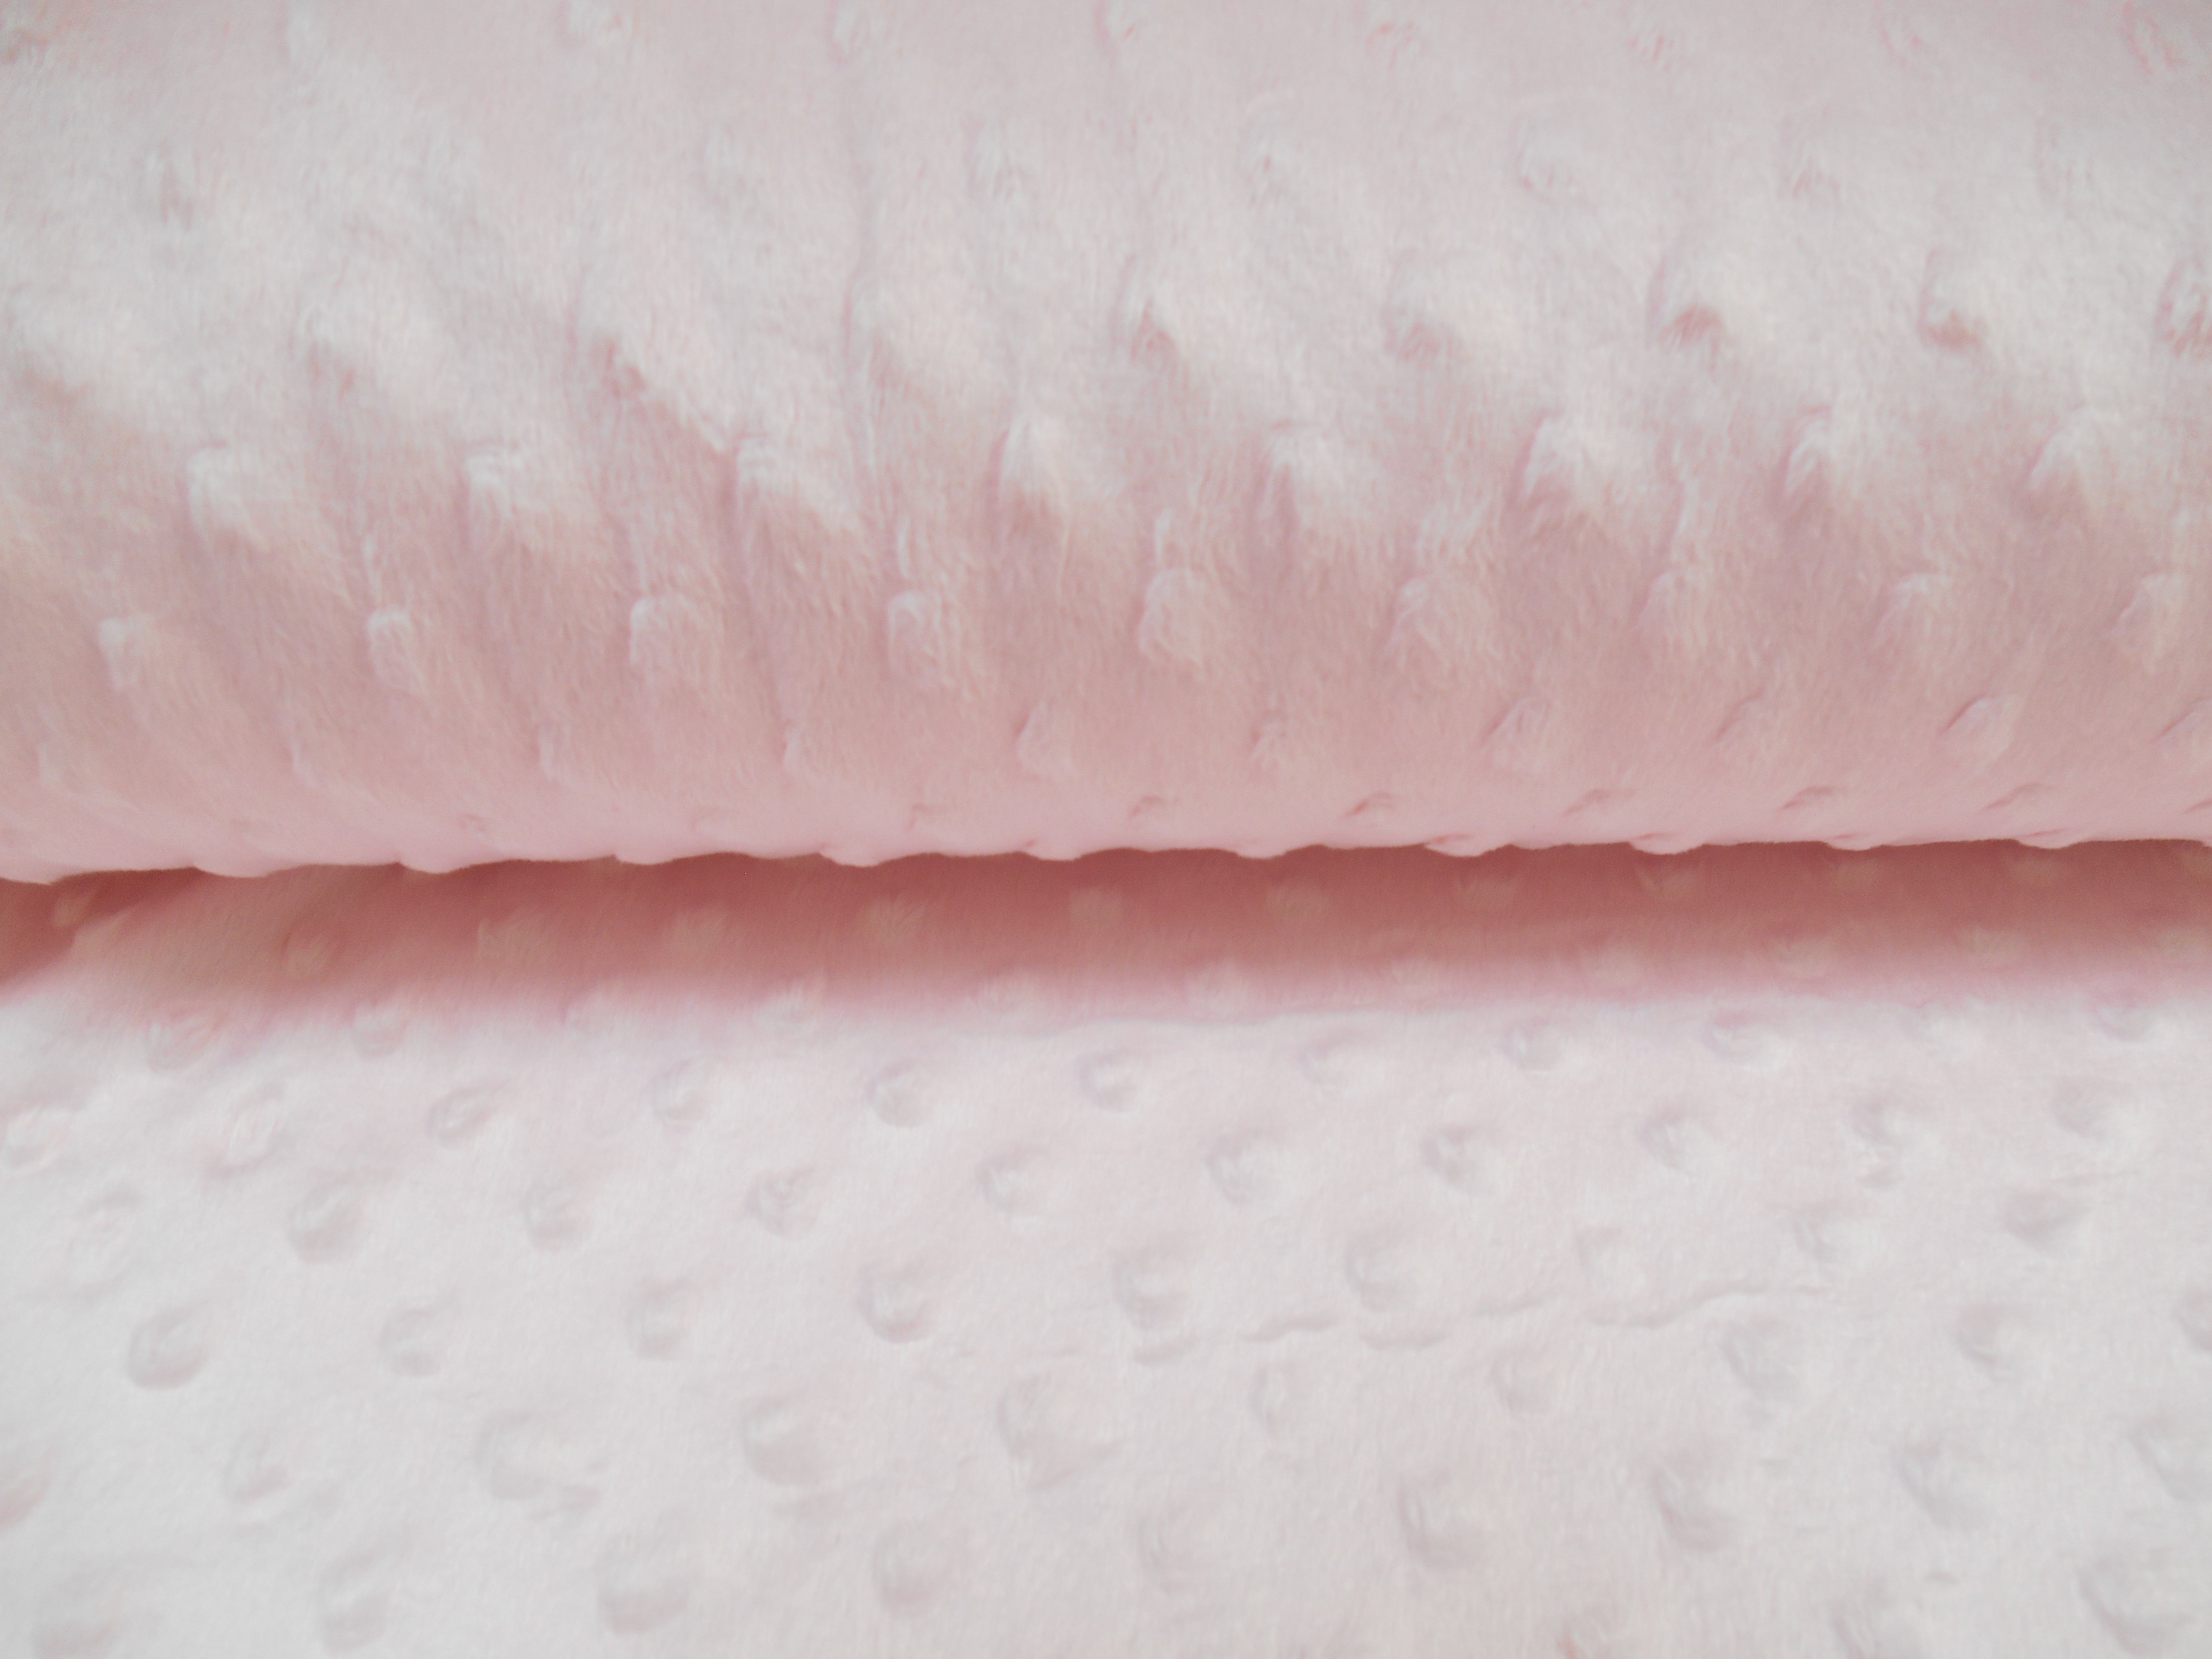 Baby pink dimple fleece supersoft popcorn fabric